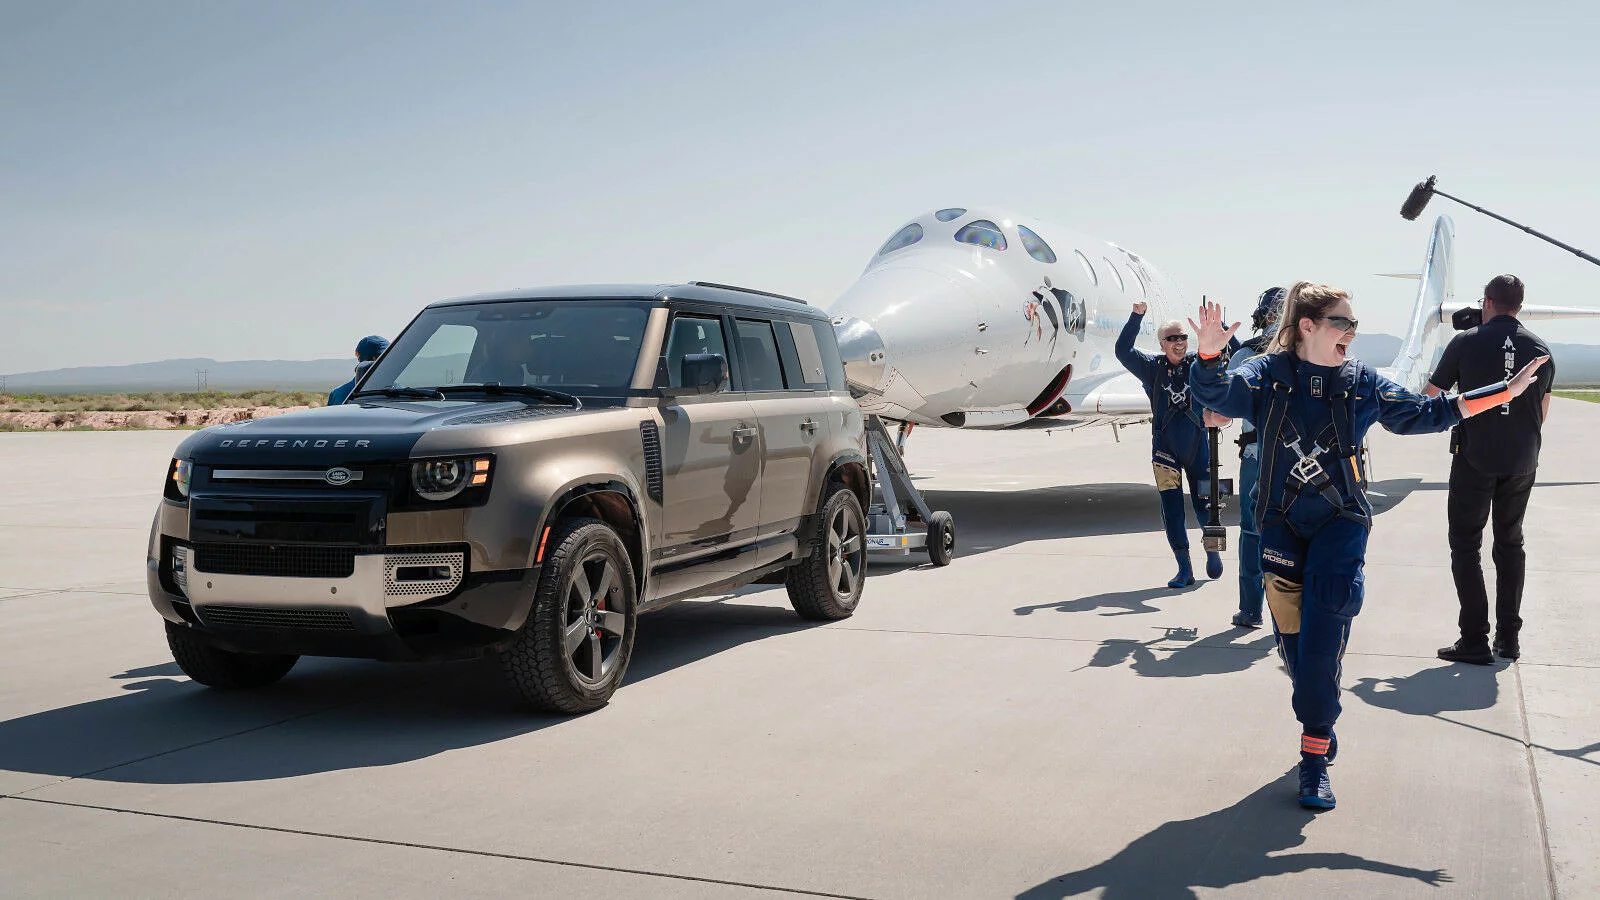 LAND ROVER SUPPORTS VIRGIN GALACTIC’S FIRST FULLY CREWED SPACE FLIGHT